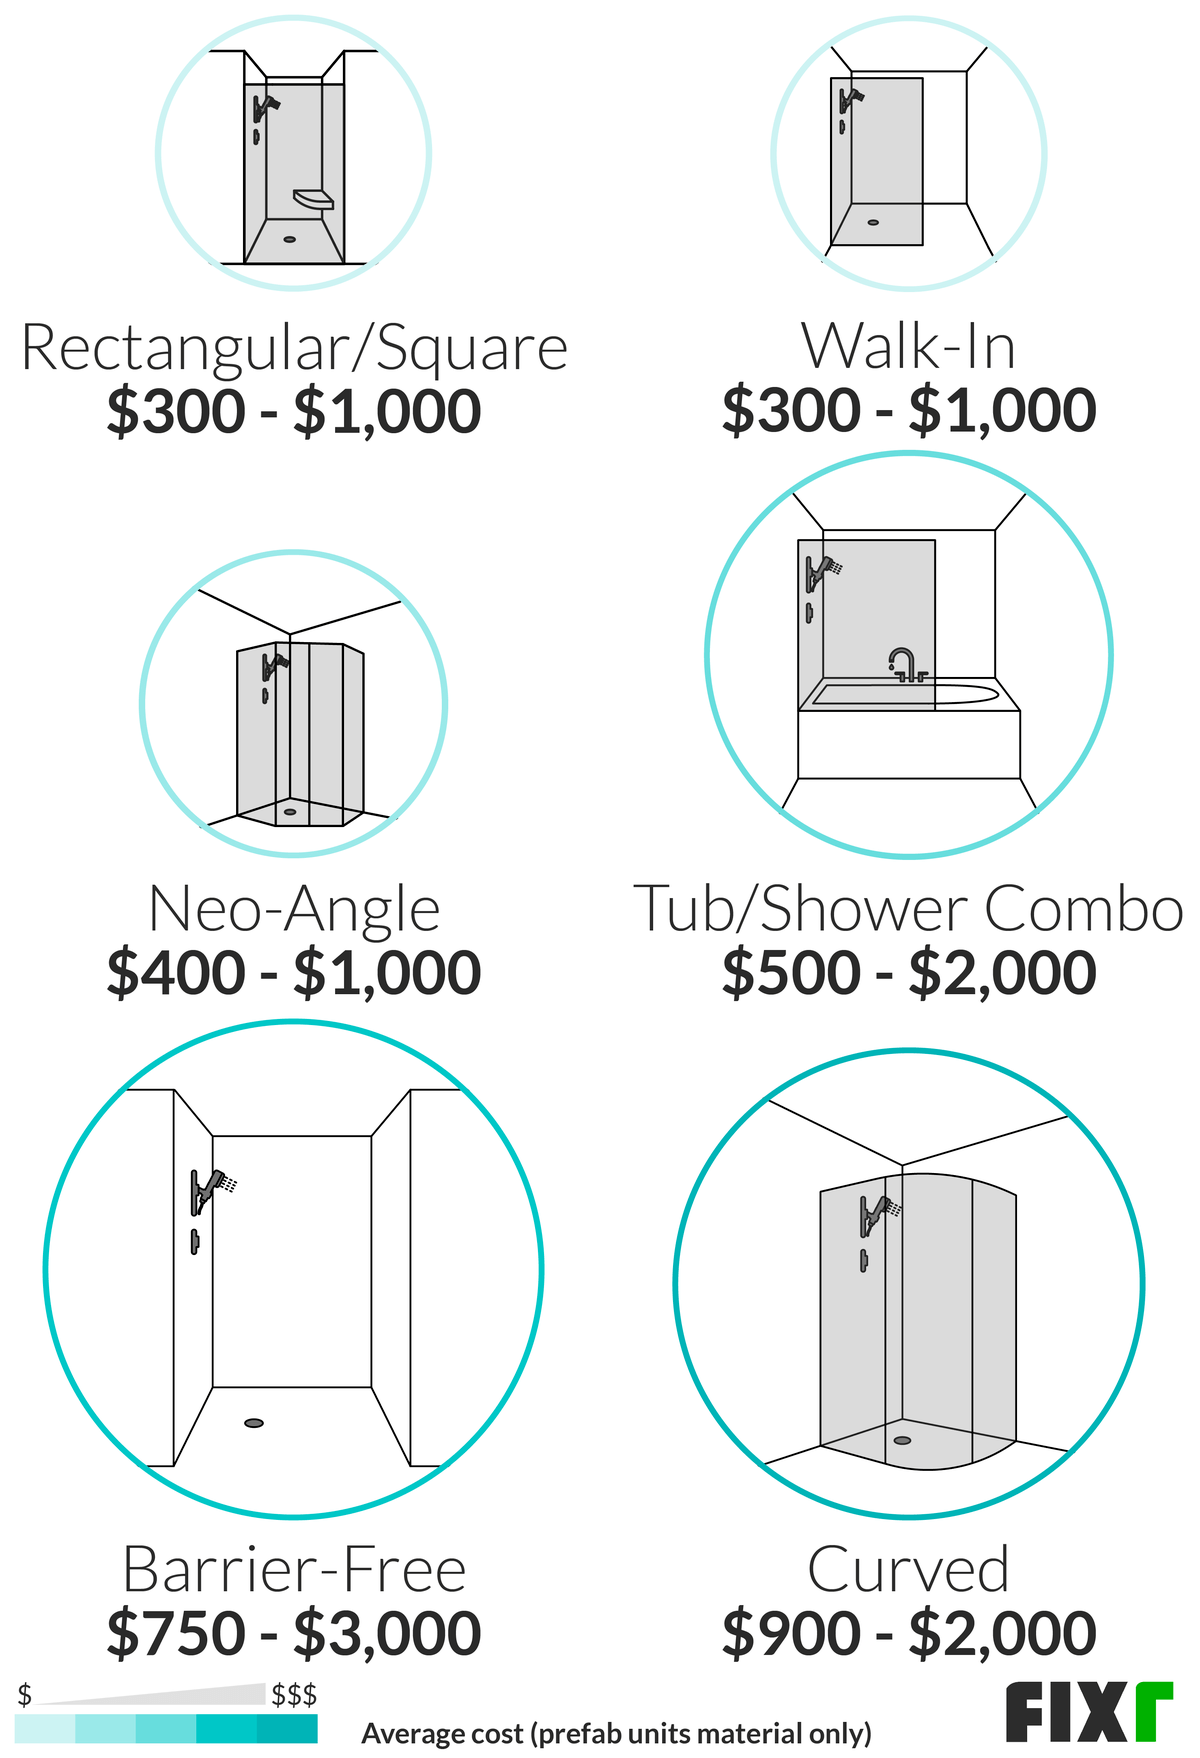 2021 Shower Installation Cost, Average Cost To Remove Bathtub And Install Walk In Shower